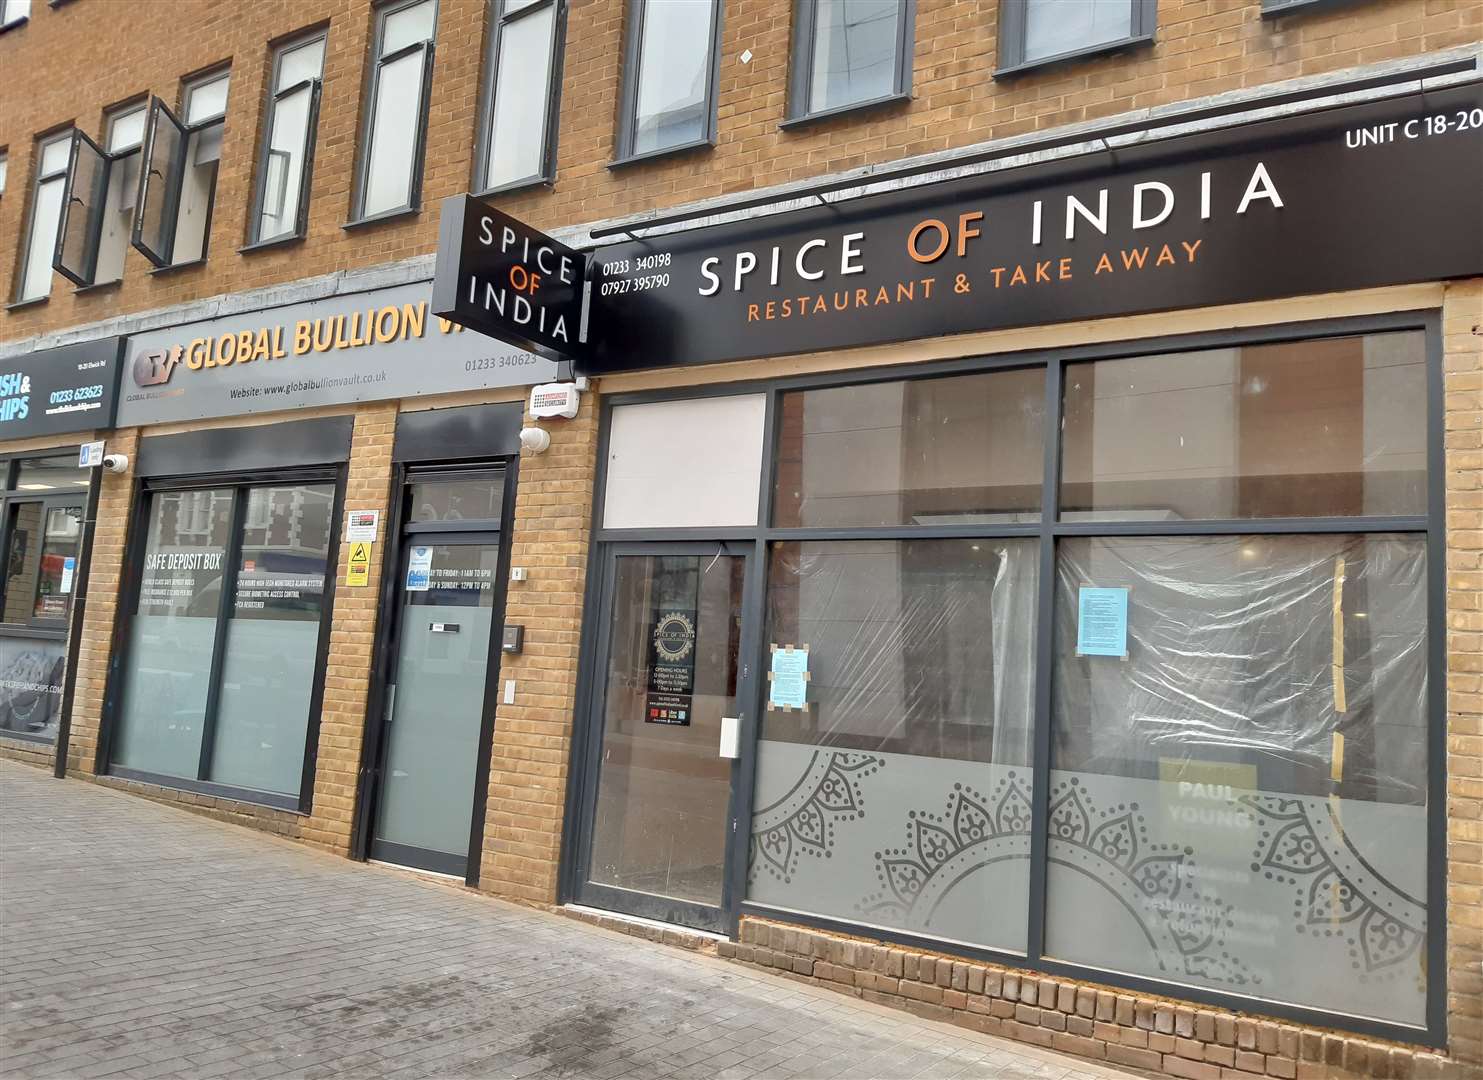 Spice of India is set to open at the bottom of Bank Street